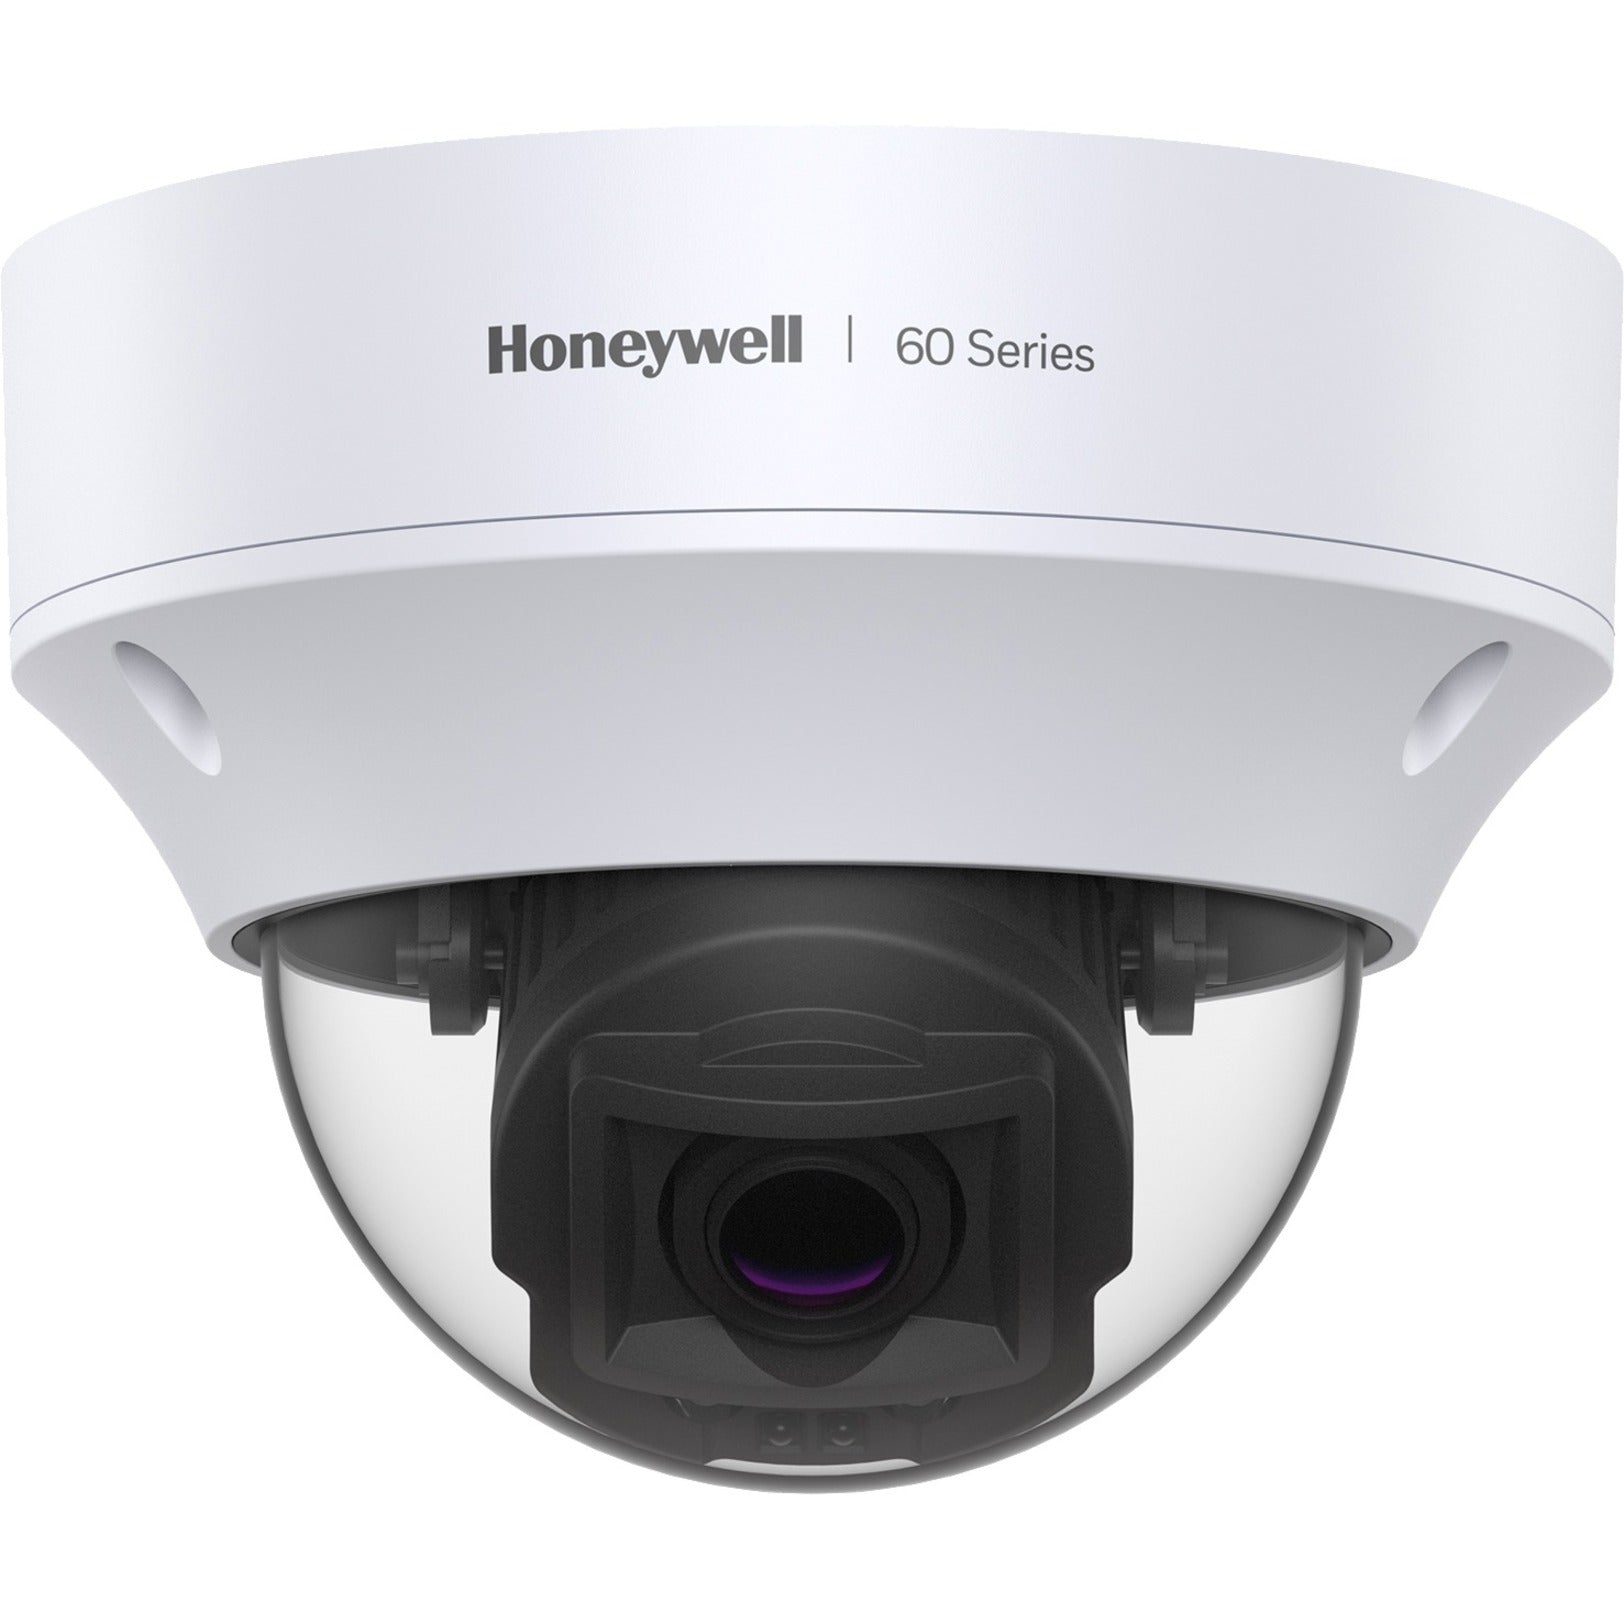 Honeywell HC60W44R2L 4MP Network TDN WDR IR Outdoor Dome Camera, Varifocal Lens, 5x Optical Zoom, Motion Detection, SD Card Local Storage, IP67/IP66 Ingress Protection